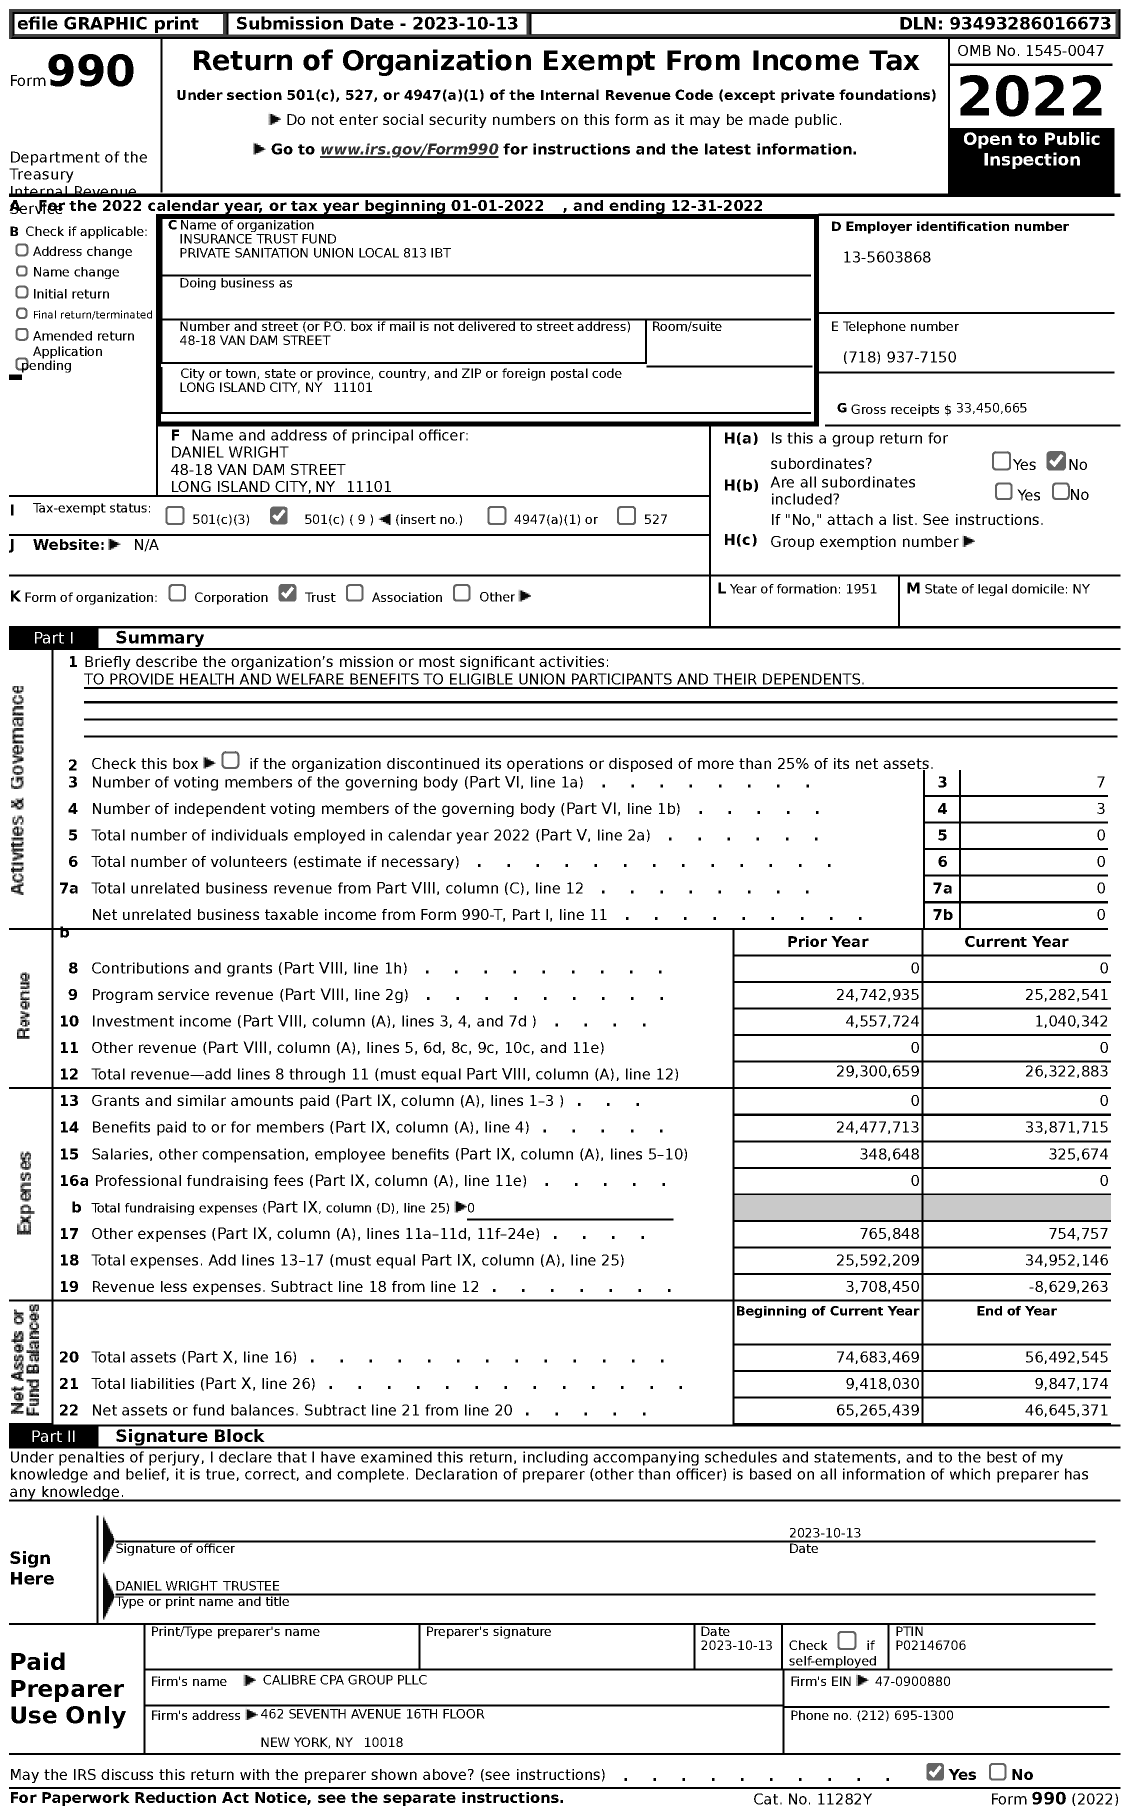 Image of first page of 2022 Form 990 for Insurance Trust Fund Private Sanitation Union Local 813 Ibt